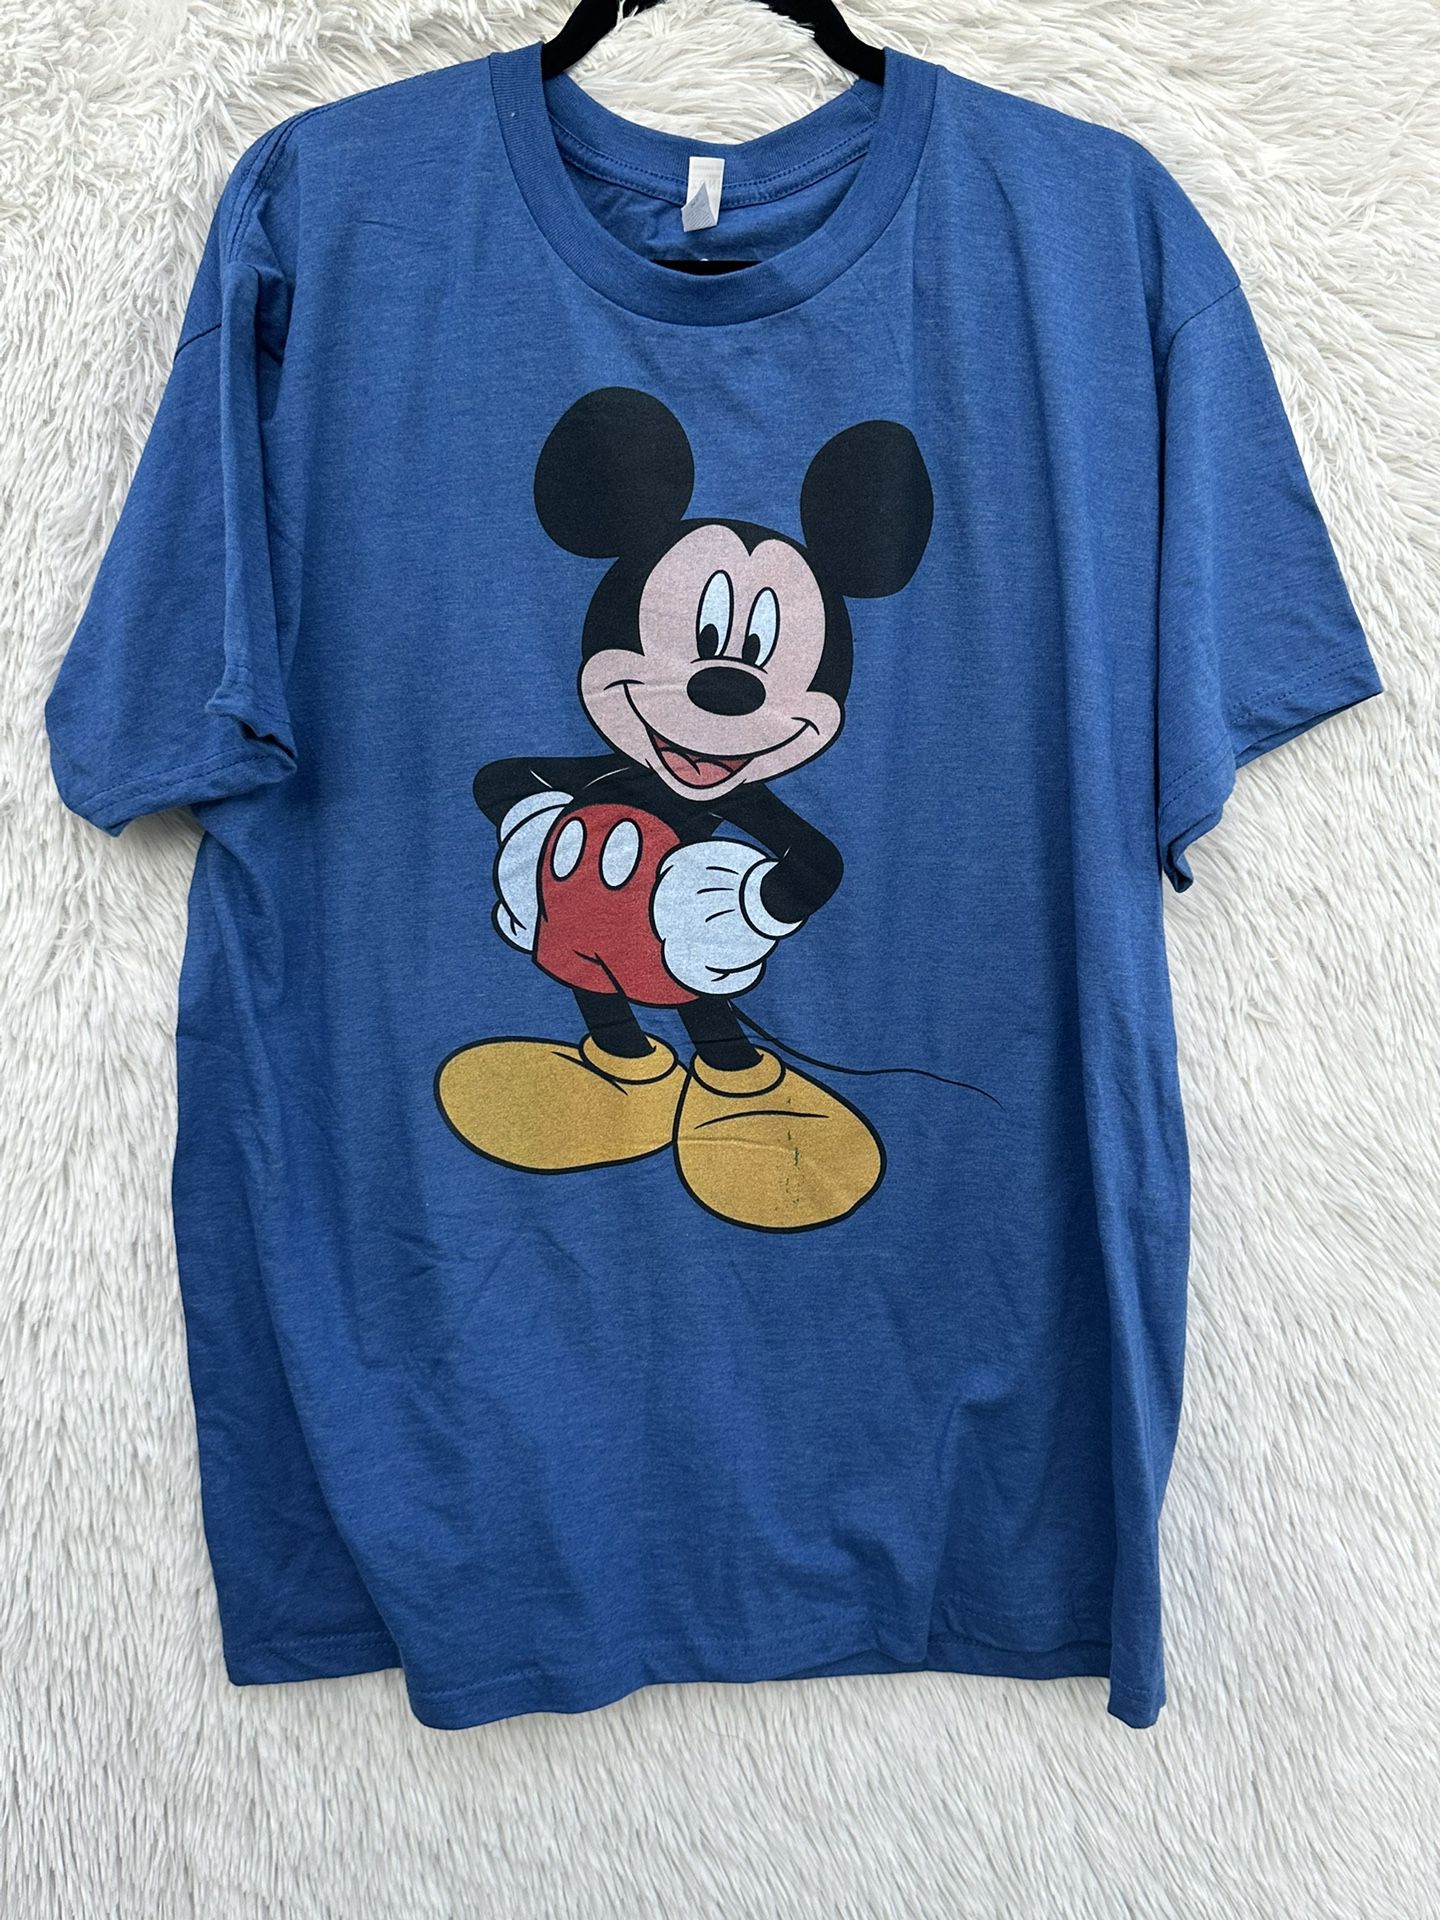 New short sleeve Mickey Mouse T-Shirt Size XL